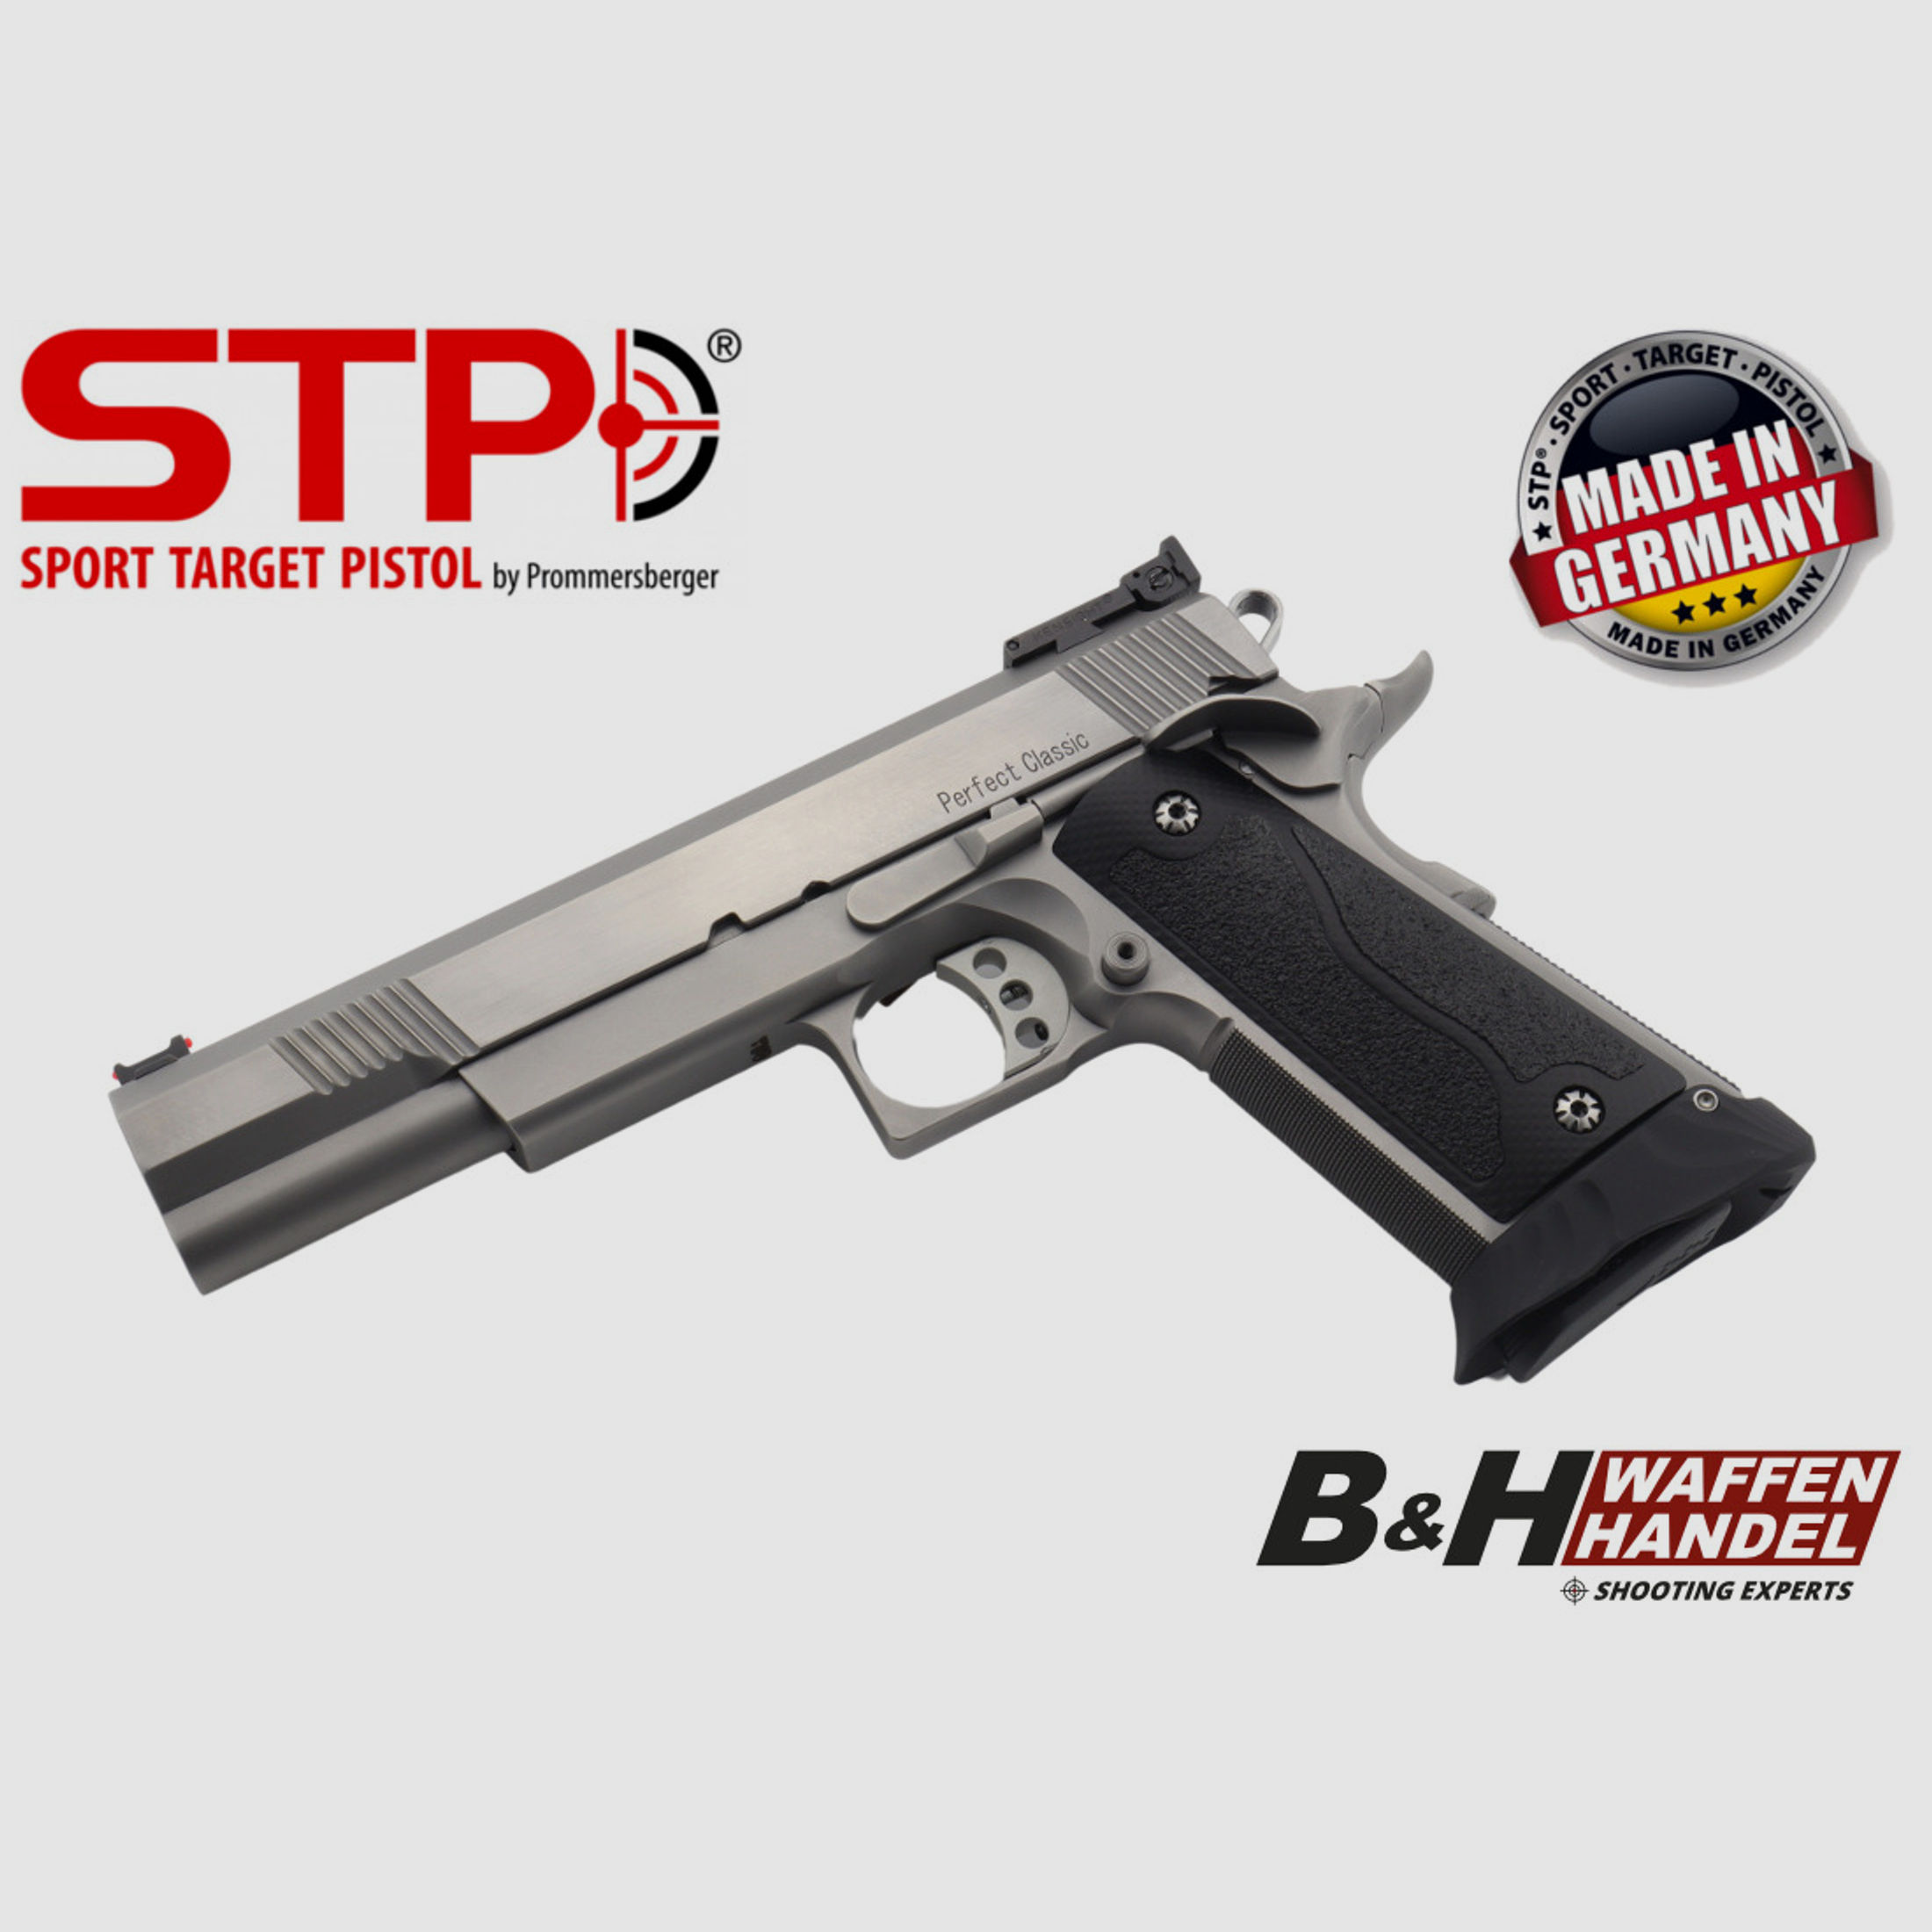  STP by Prommersberger  Perfect Classic